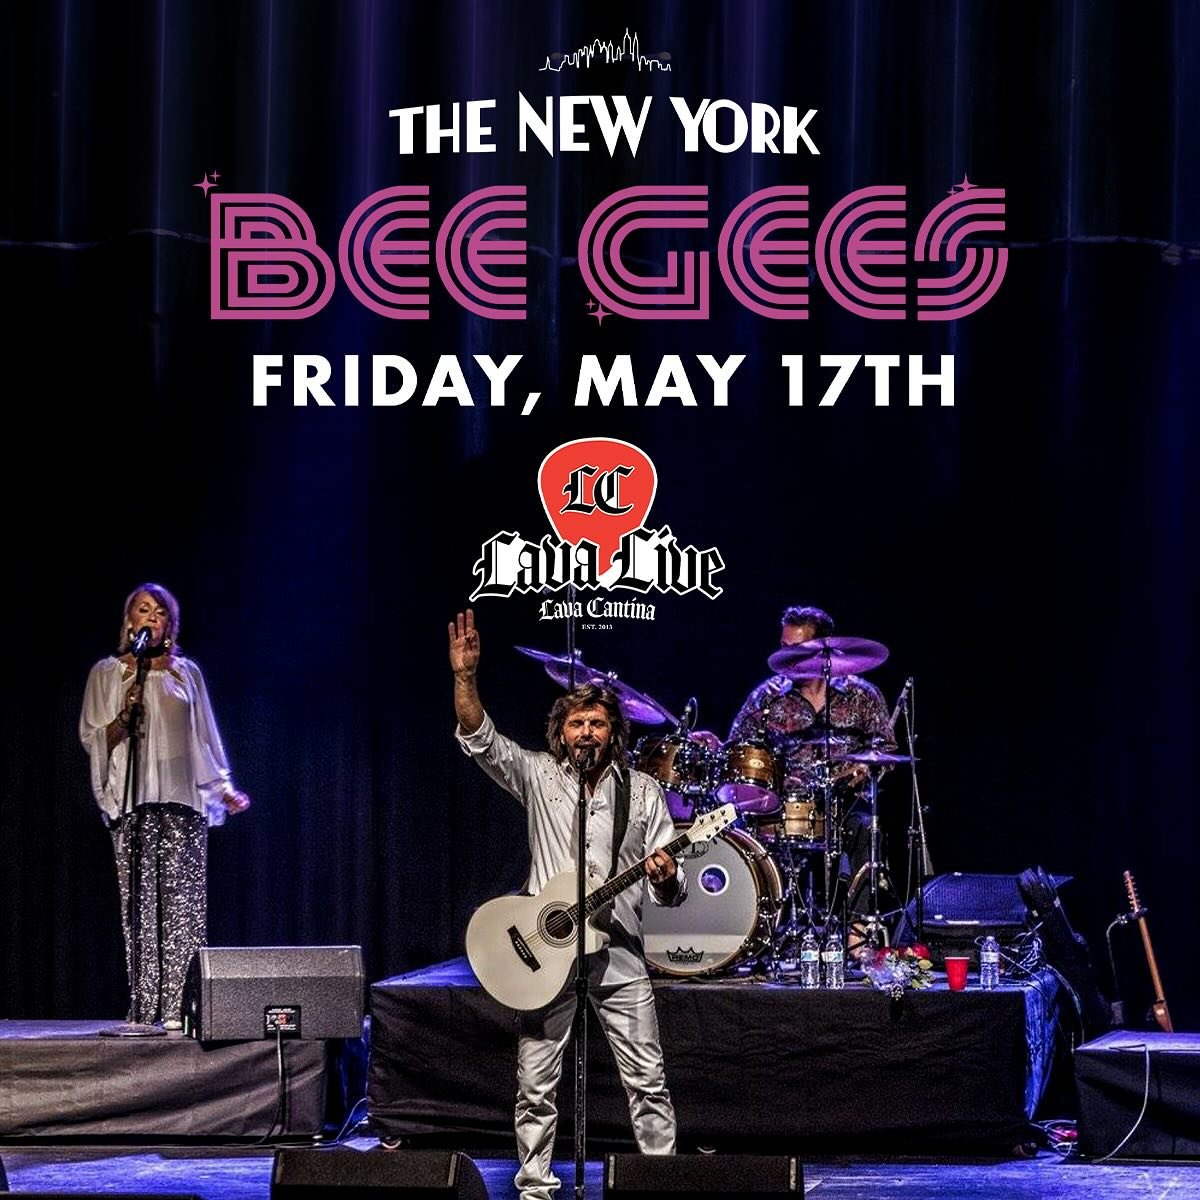 🚨 FRIDAY, MAY 17TH @lavacantinatc 🚨

🎟️🎟️➡️ LavaCantina.com ⬅️🎟️🎟️

THE NEW YORK BEE GEES
🔥Lava Live at Lava Cantina
AGEE: All Ages! 
Doors 6:30 PM | Opening DJ 8 PM

STAR WARS vs STAR TREK LIVE TRIVIA
💀Lava Cantina&rsquo;s Voodoo Lounge
AGES